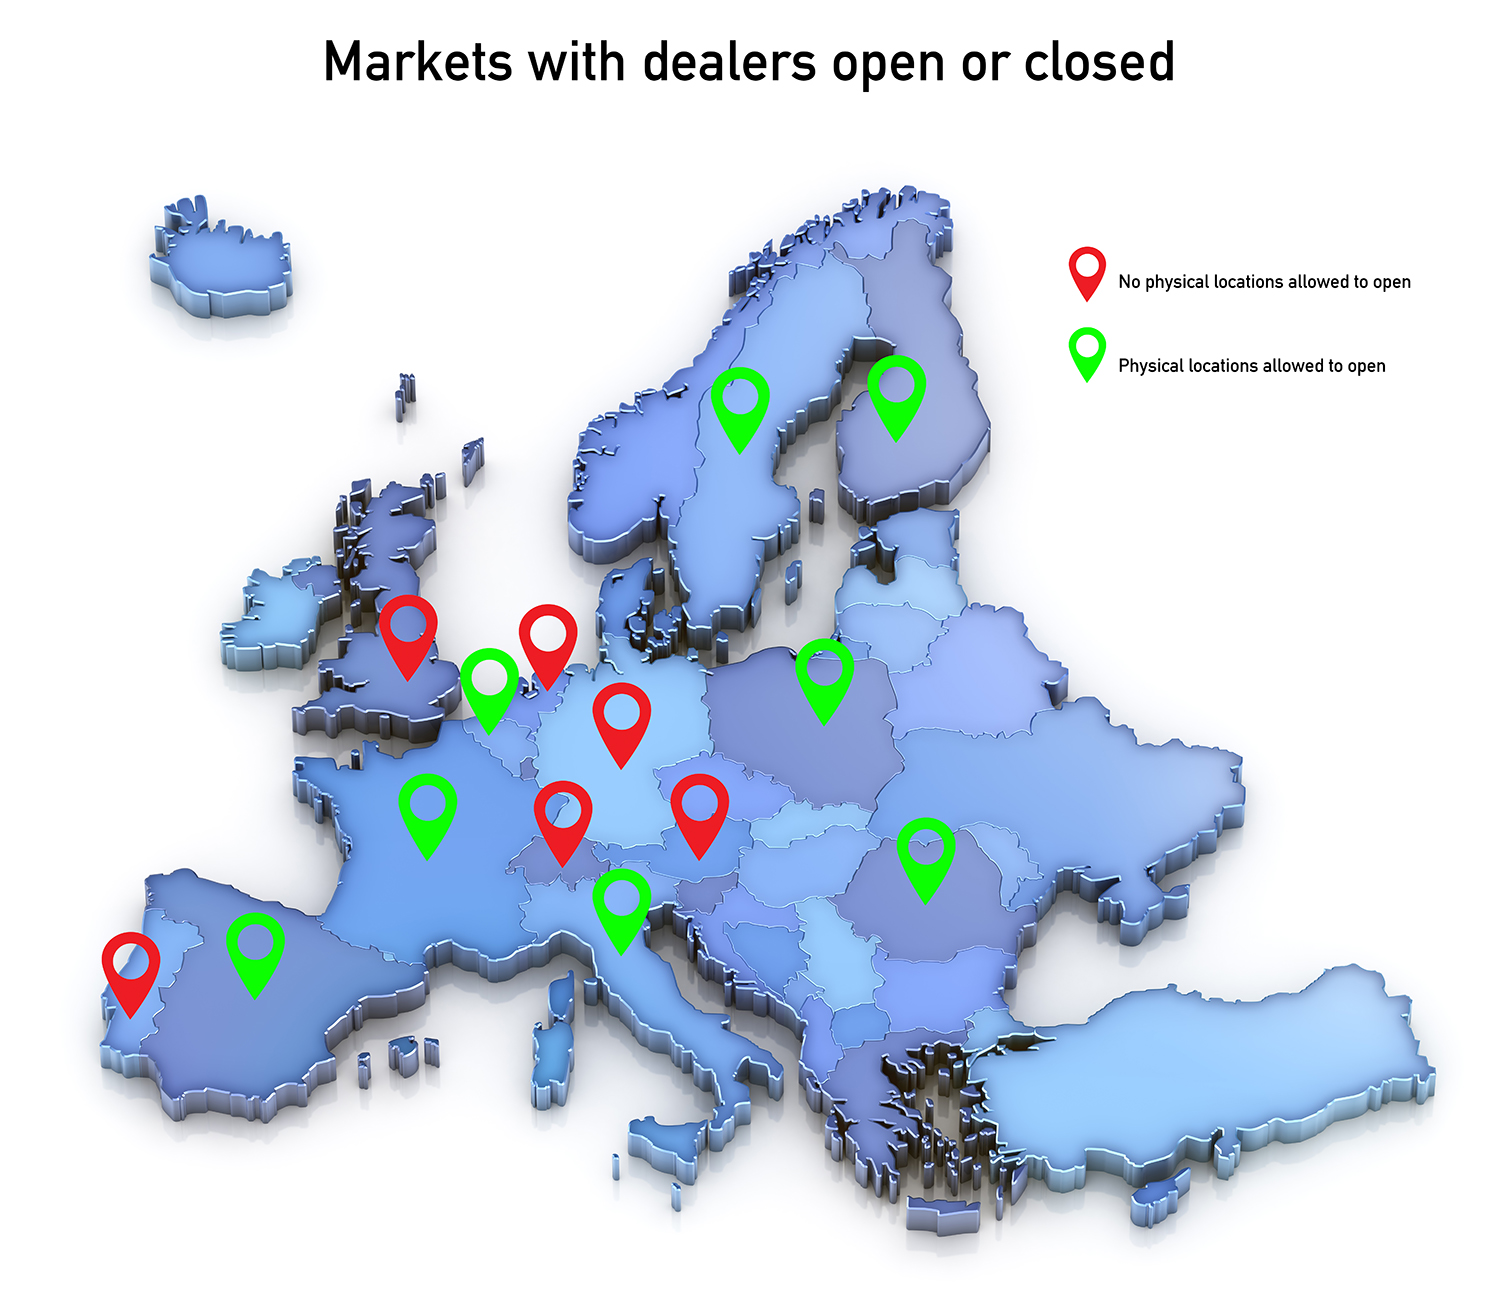 European map showing locations of dealerships open and closed during COVID-19 lockdowns